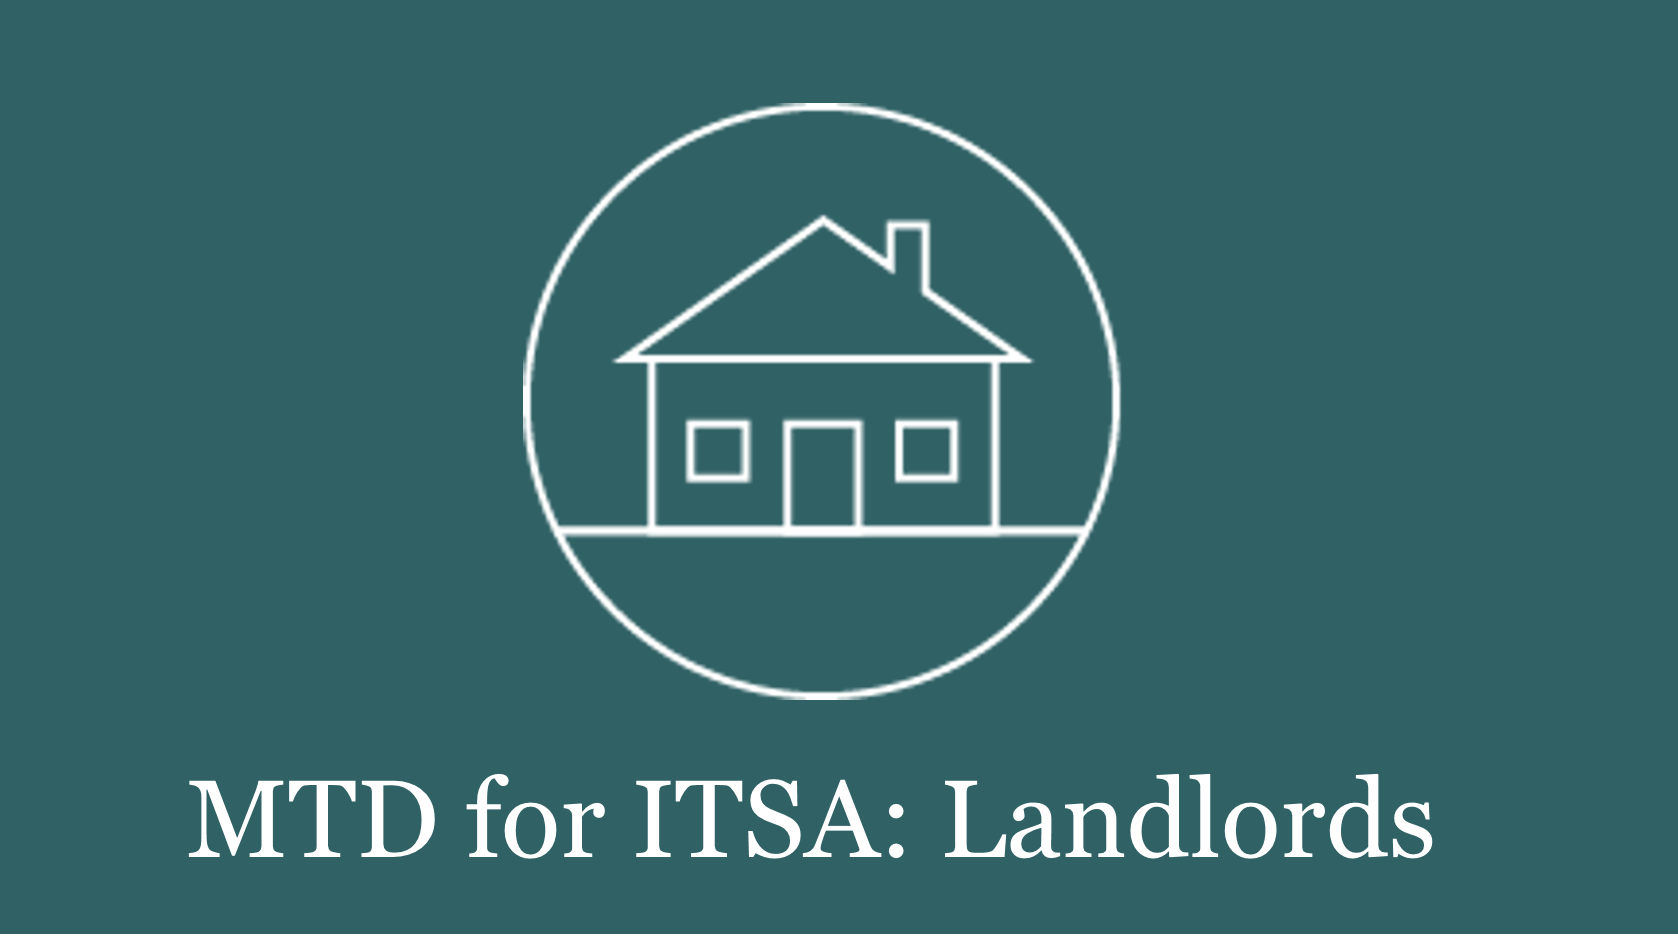 New reporting requirements for Landlords